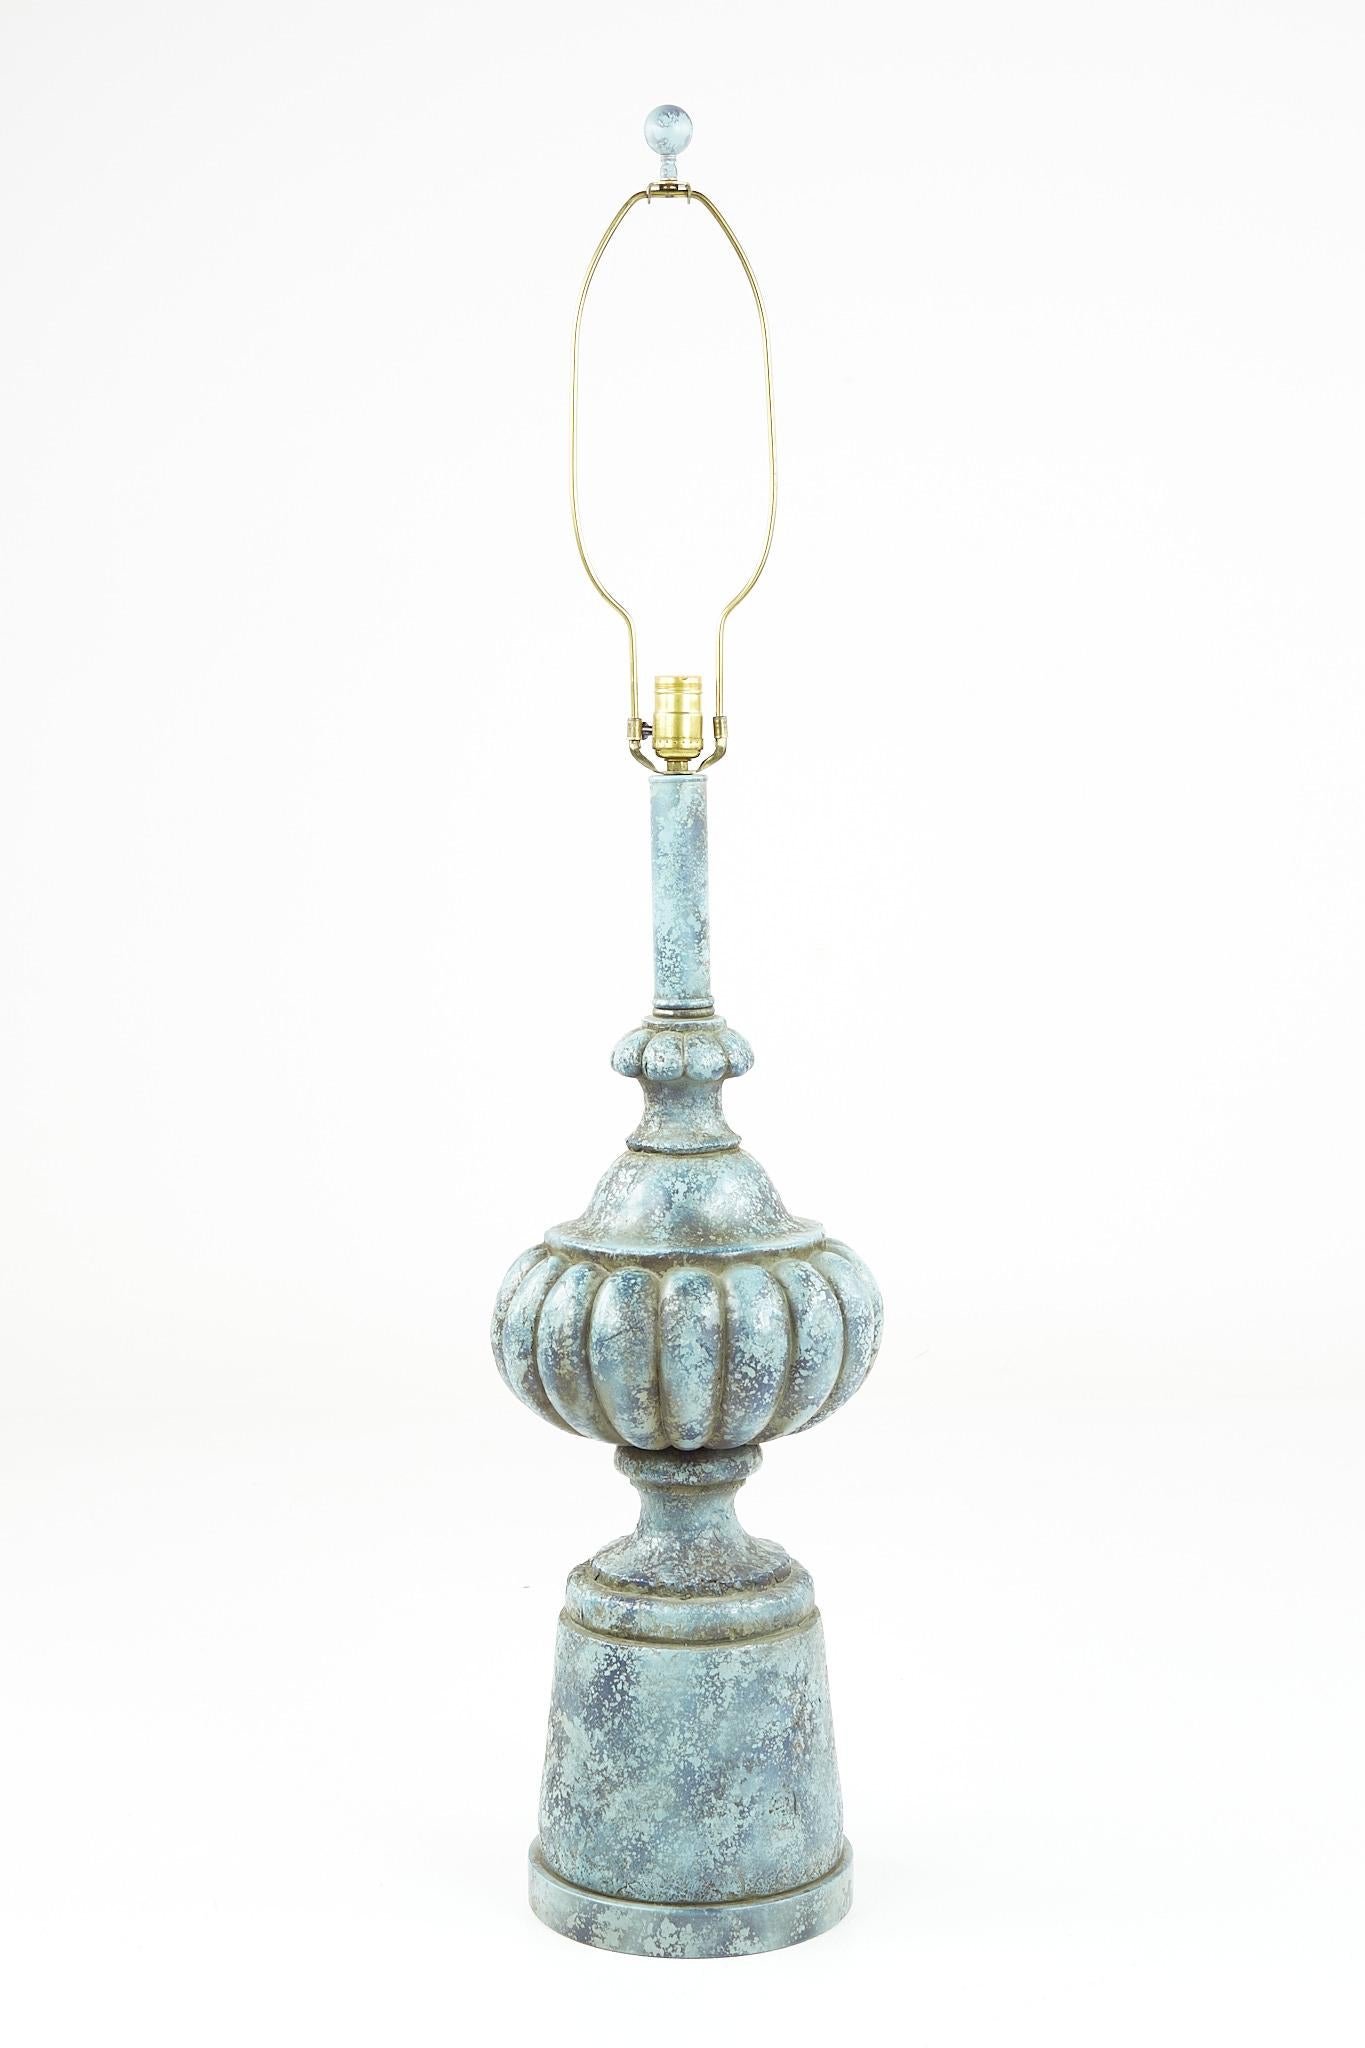 Mid century blue ceramic table lamp

This lamp measures: 10.5 wide x 10.5 deep x 48 inches high

We take our photos in a controlled lighting studio to show as much detail as possible. We do not photoshop out blemishes. 

We keep you fully